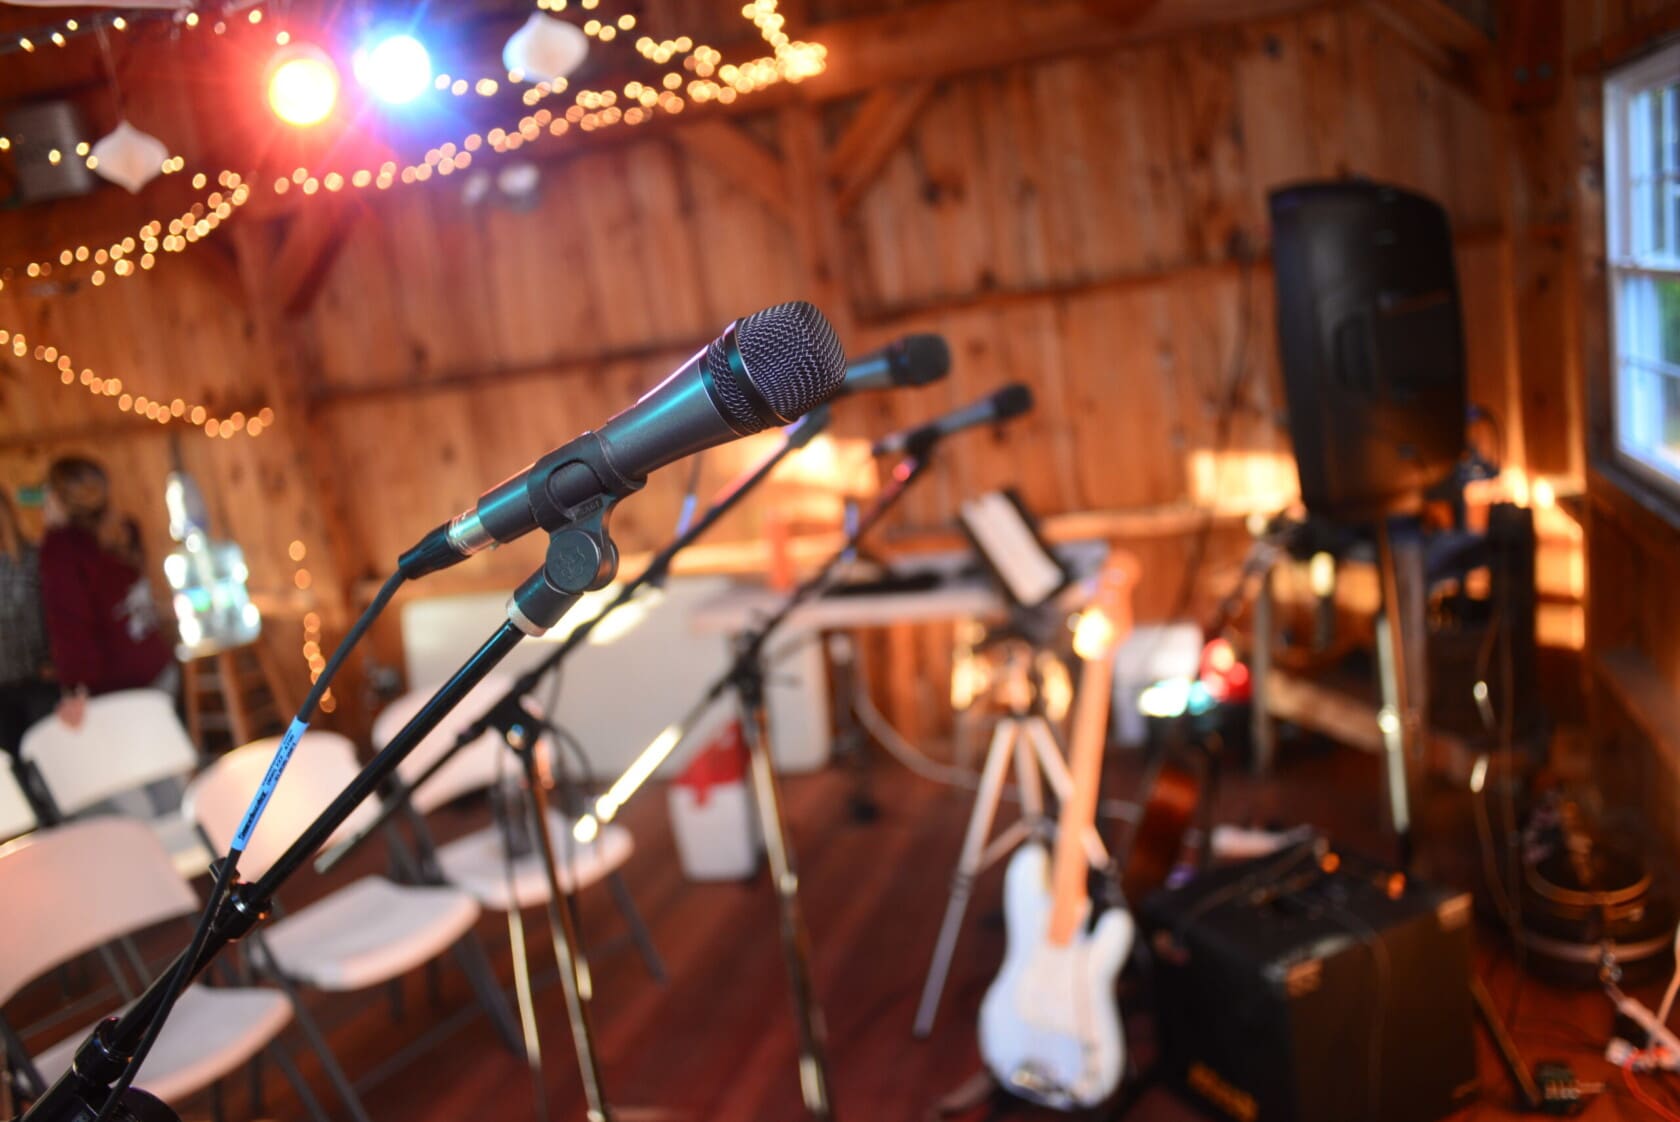 Microphones and lights are ready for a musician to take the stage.